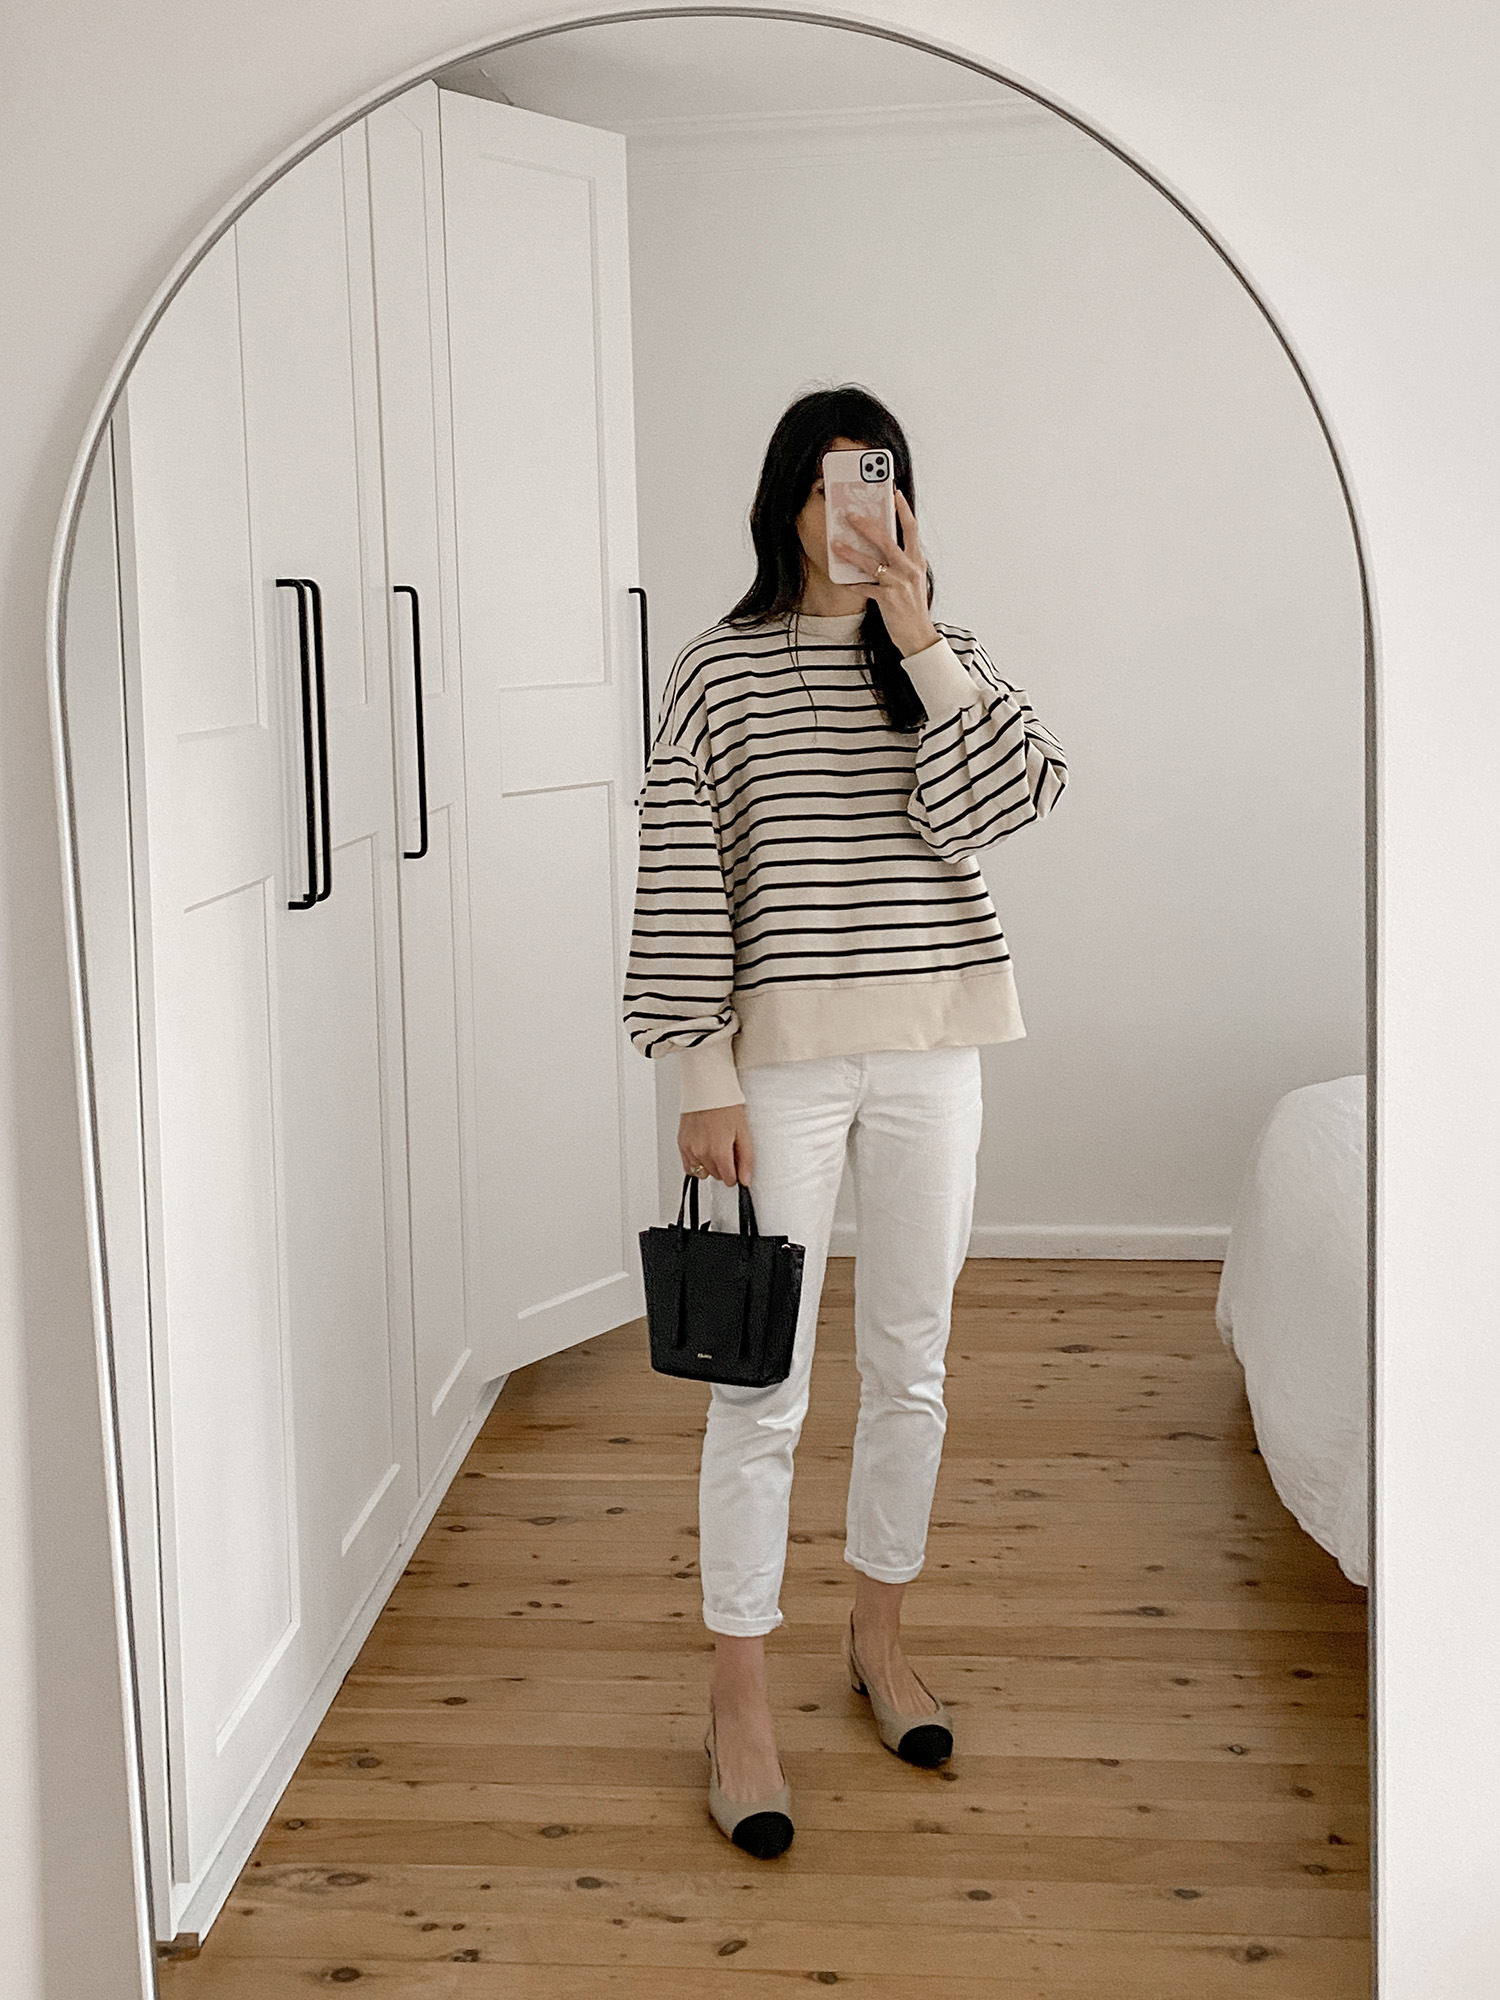 Ceres Life striped sweater with Everlane 90s cheeky jeans